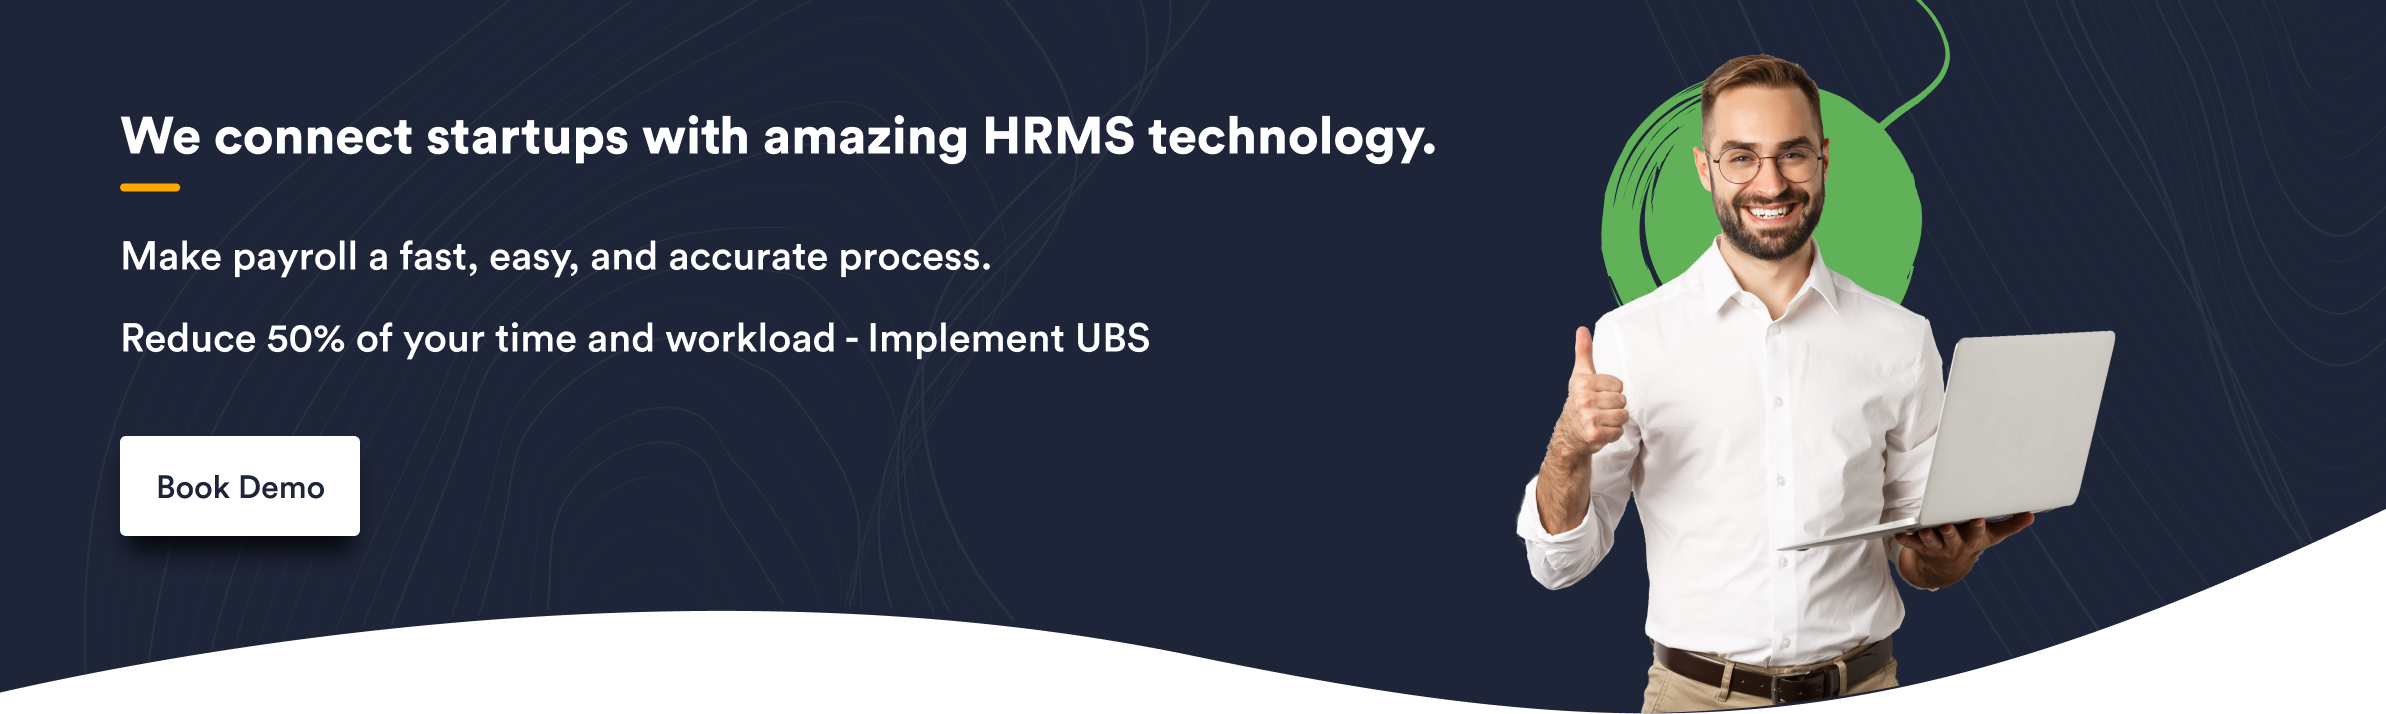 We connect startups with amazing HRMS technology.